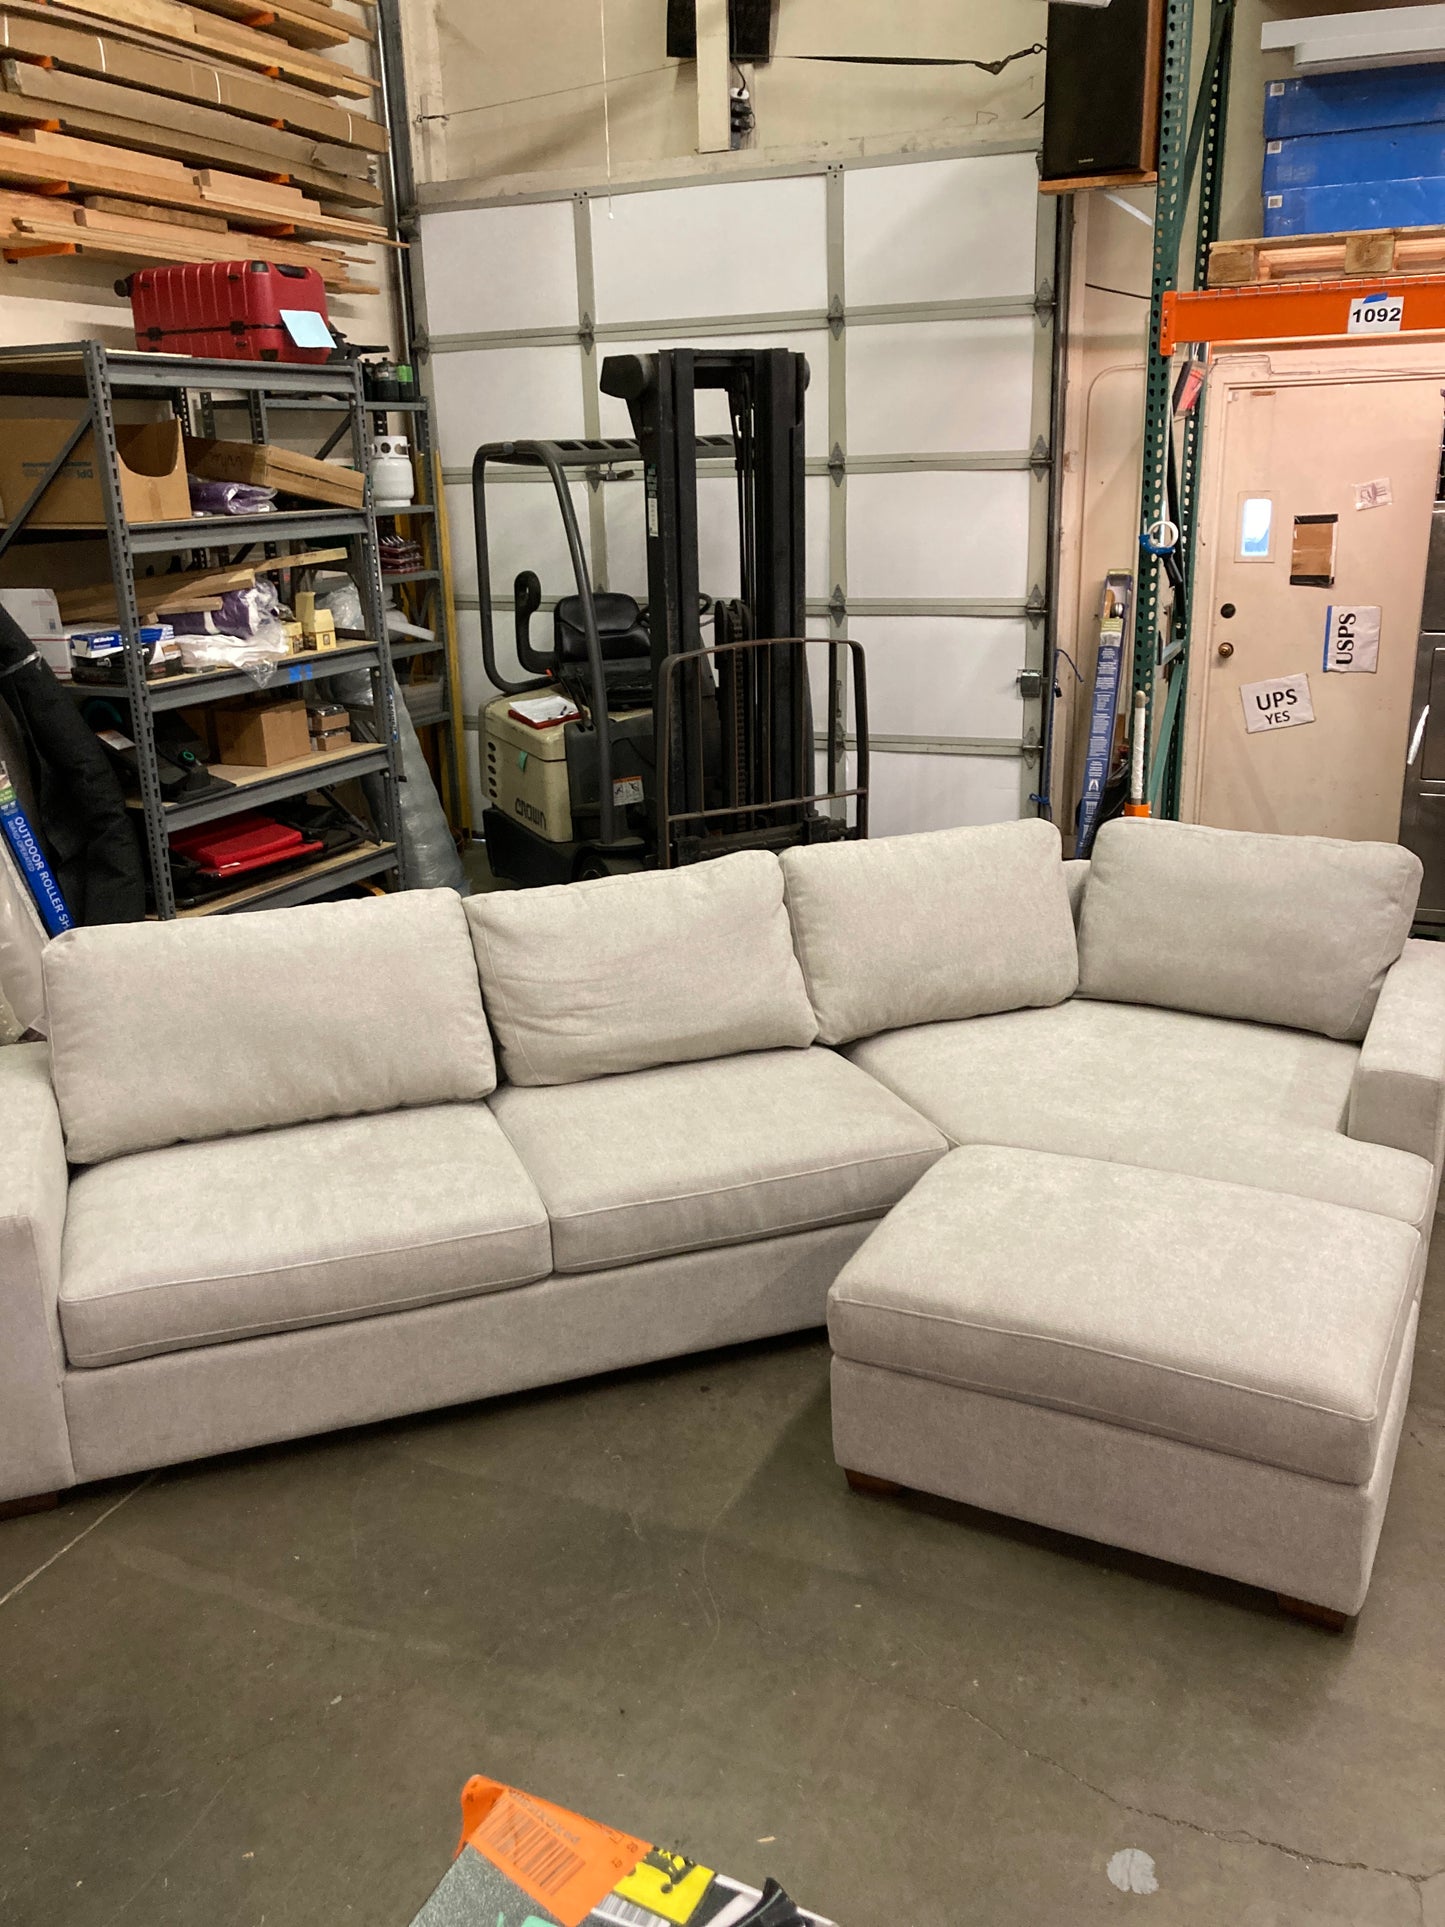 Costco - Thomasville Ezra Fabric Sectional with Ottoman - Retail $1799 Default Title